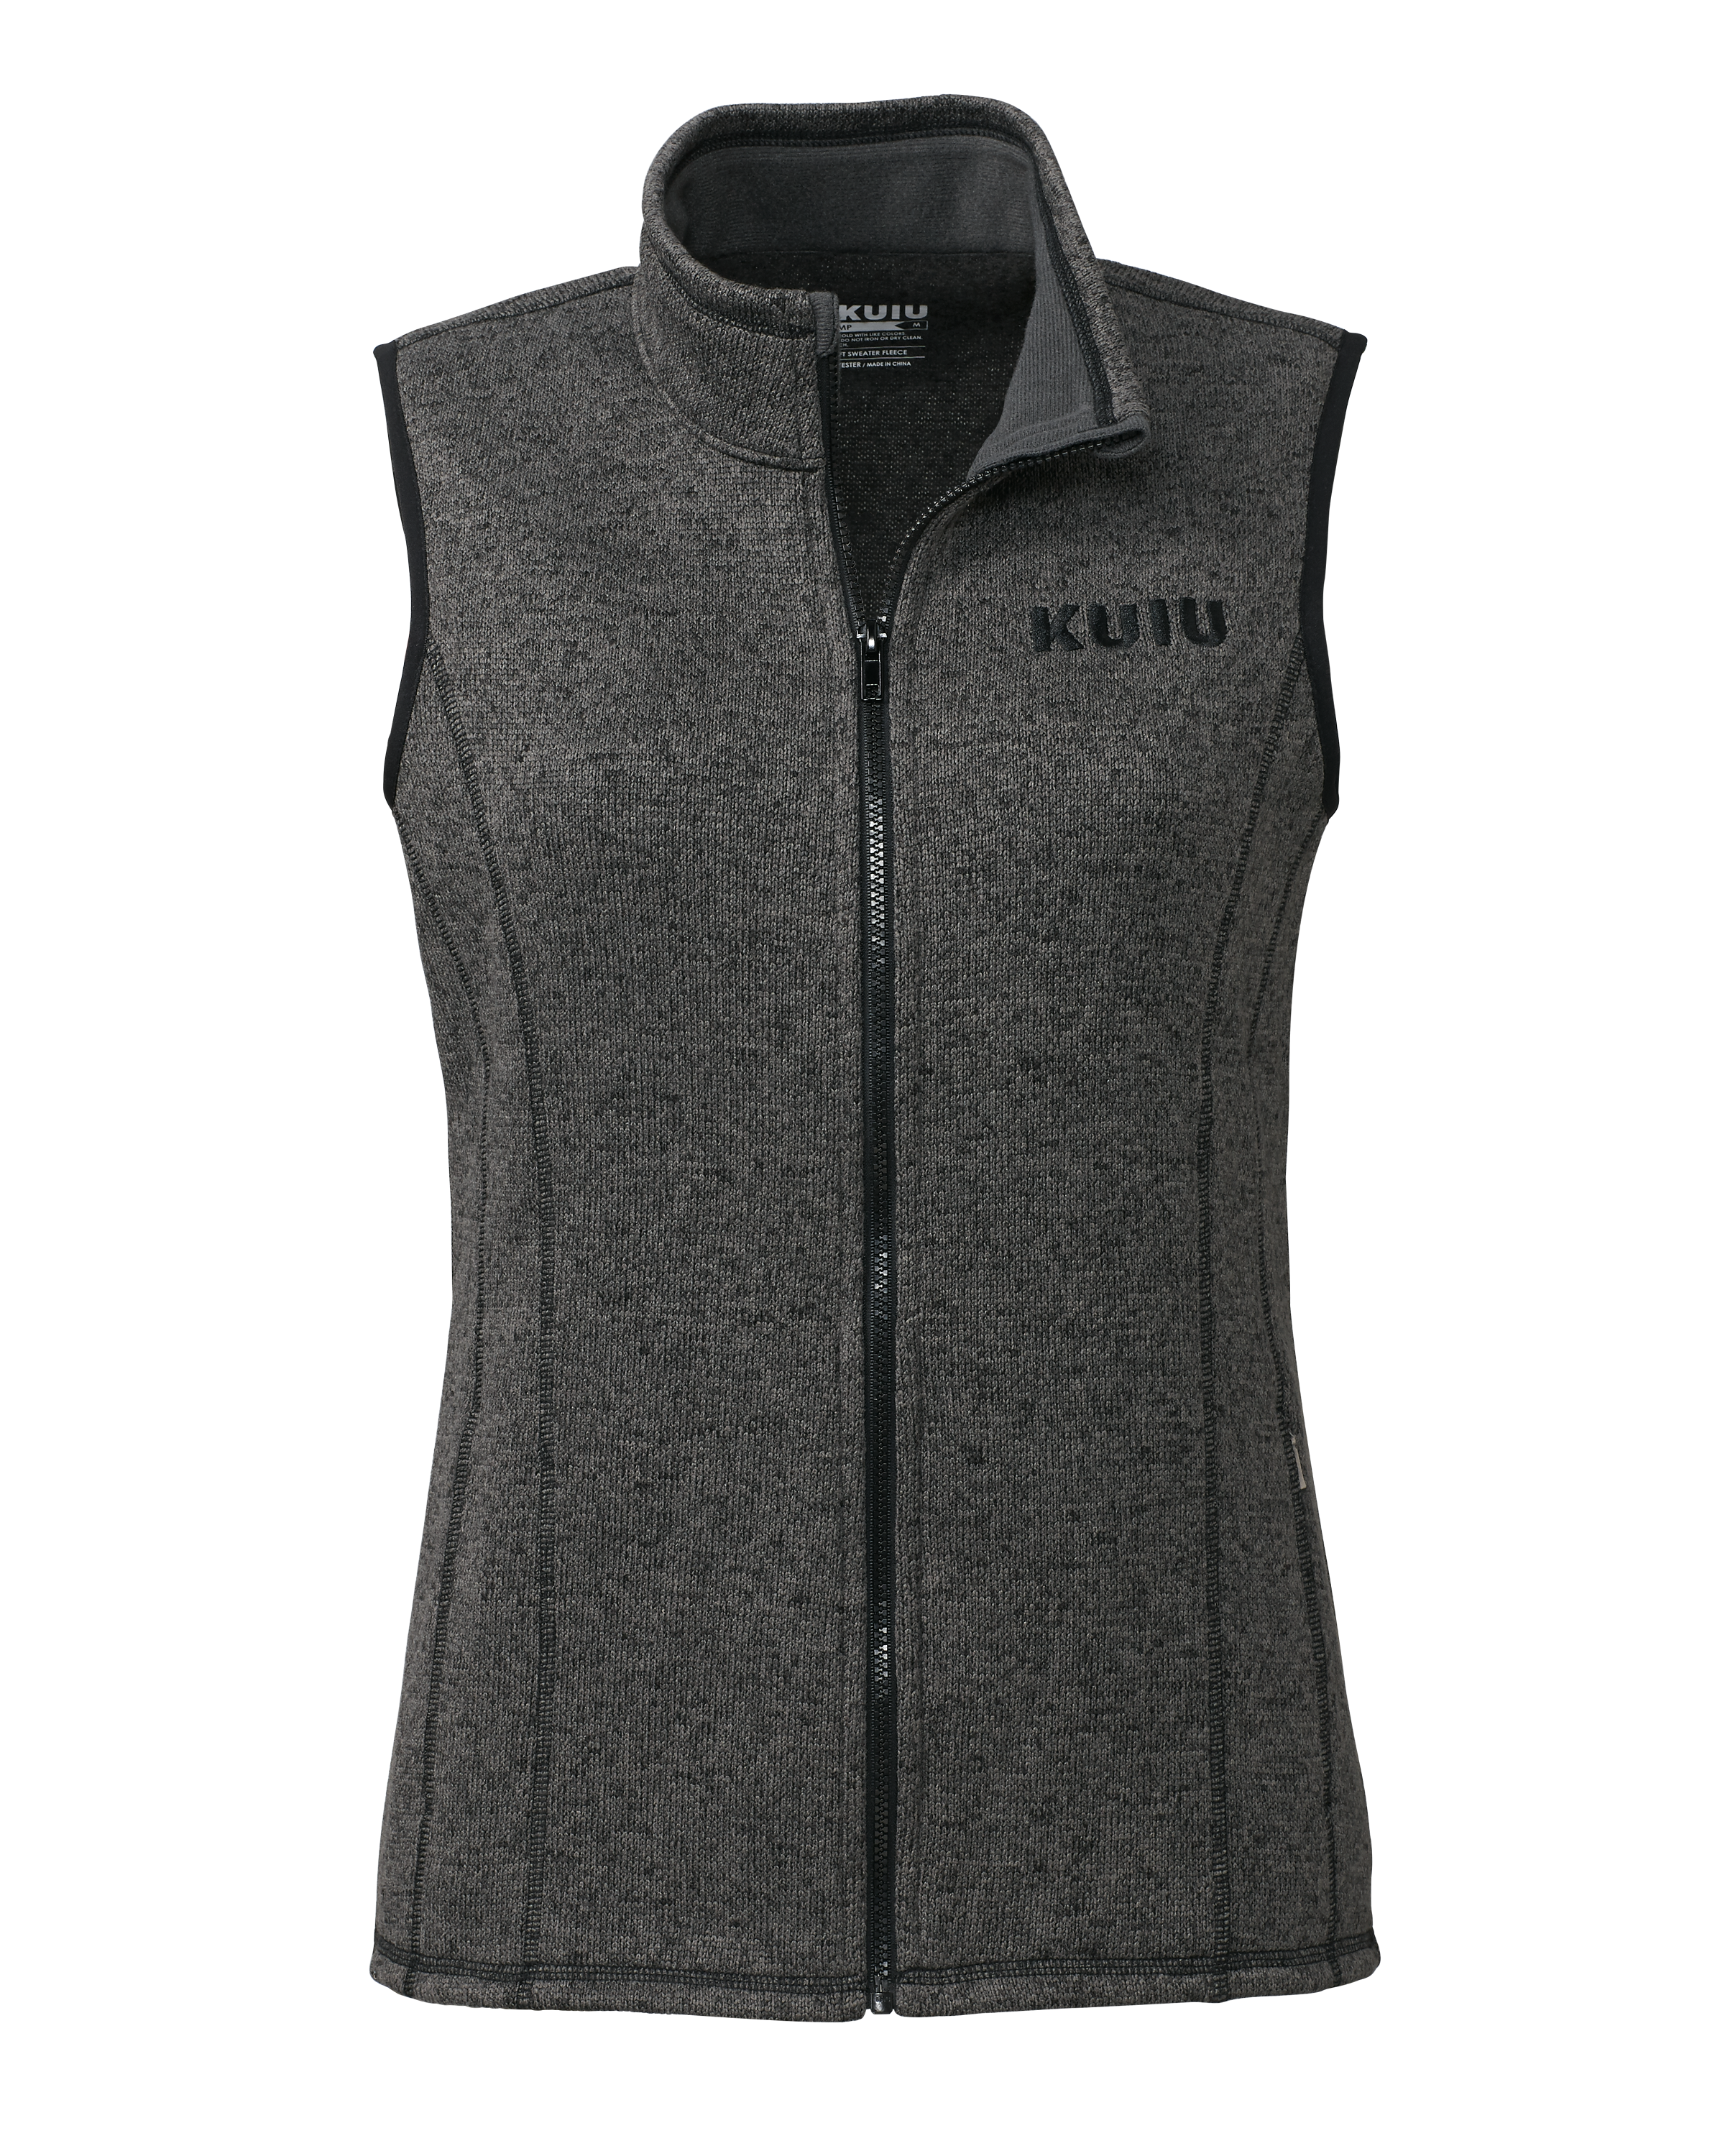 KUIU Women's Base Camp Sweater Vest in Charcoal | Size XS